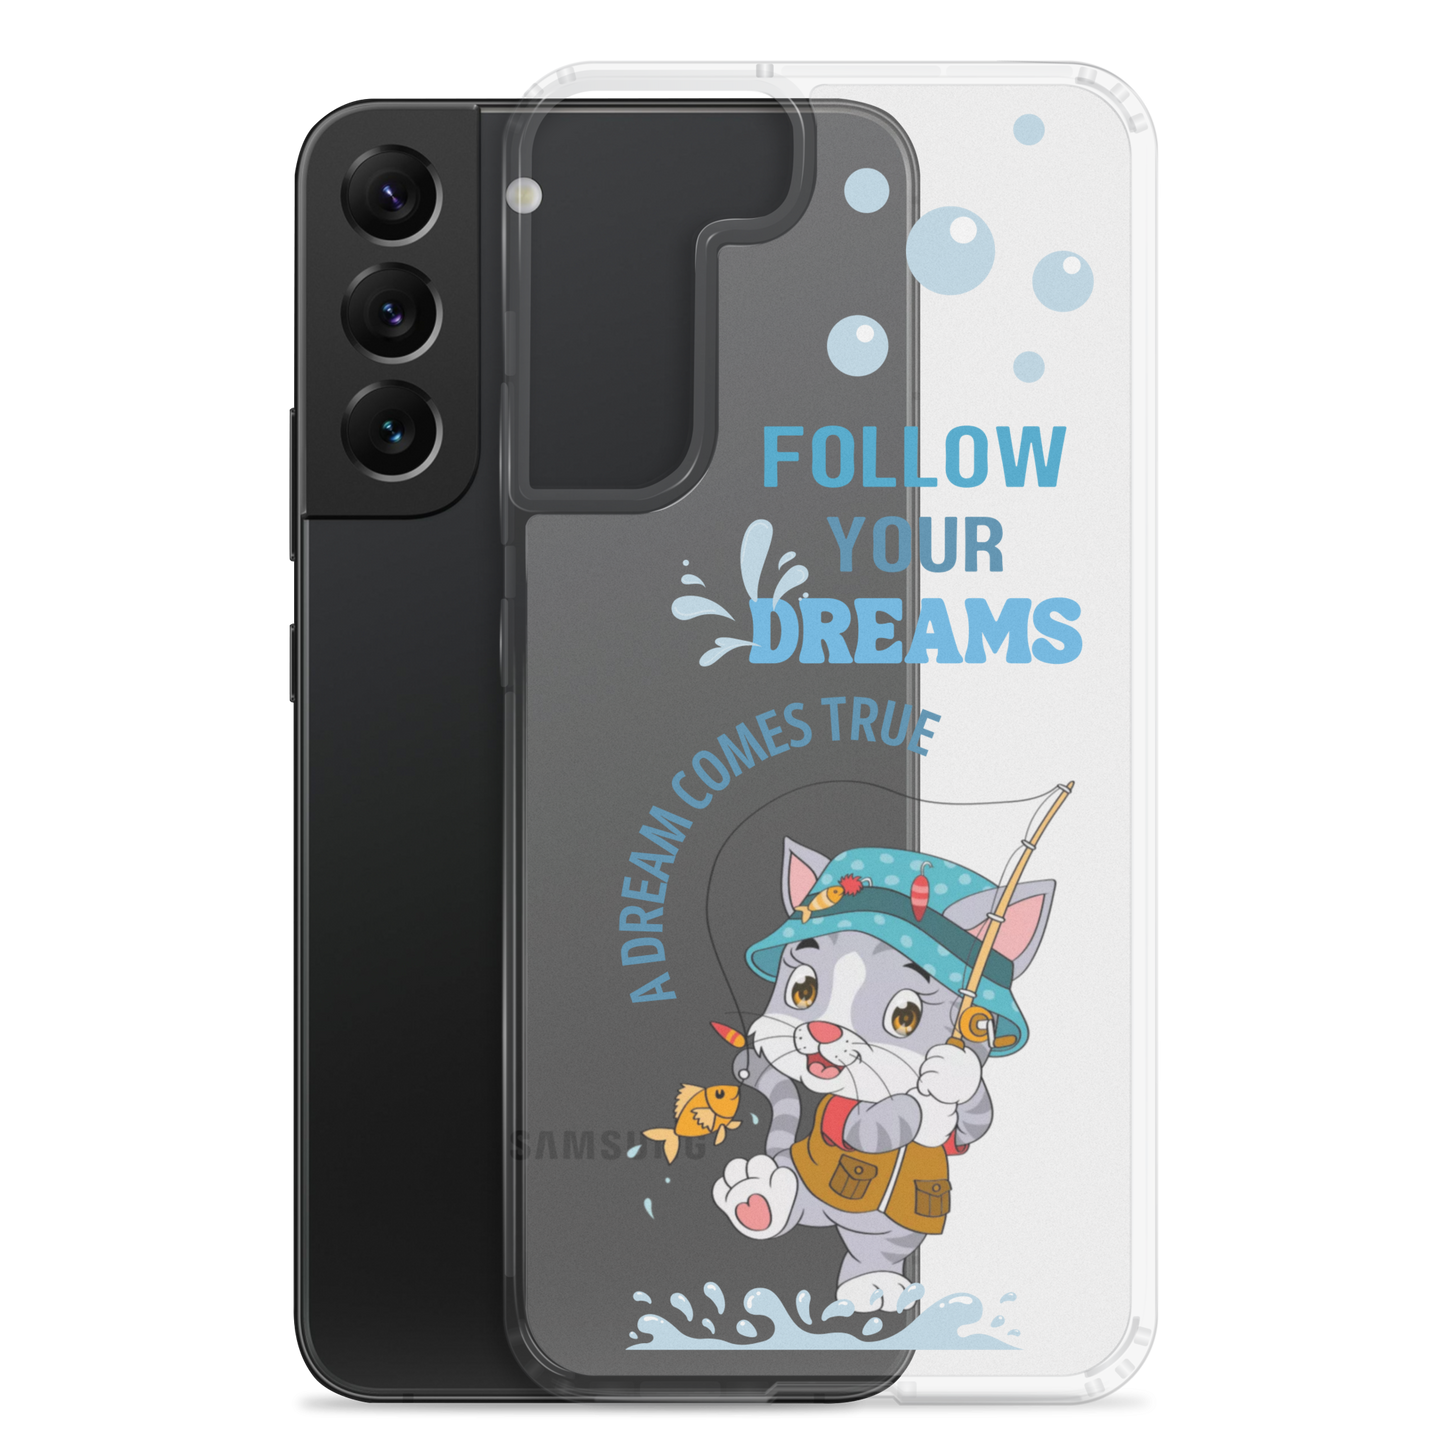 Clear Case for Samsung Galaxy S22, S22 Plus, S22 Ultra | Dream Cat